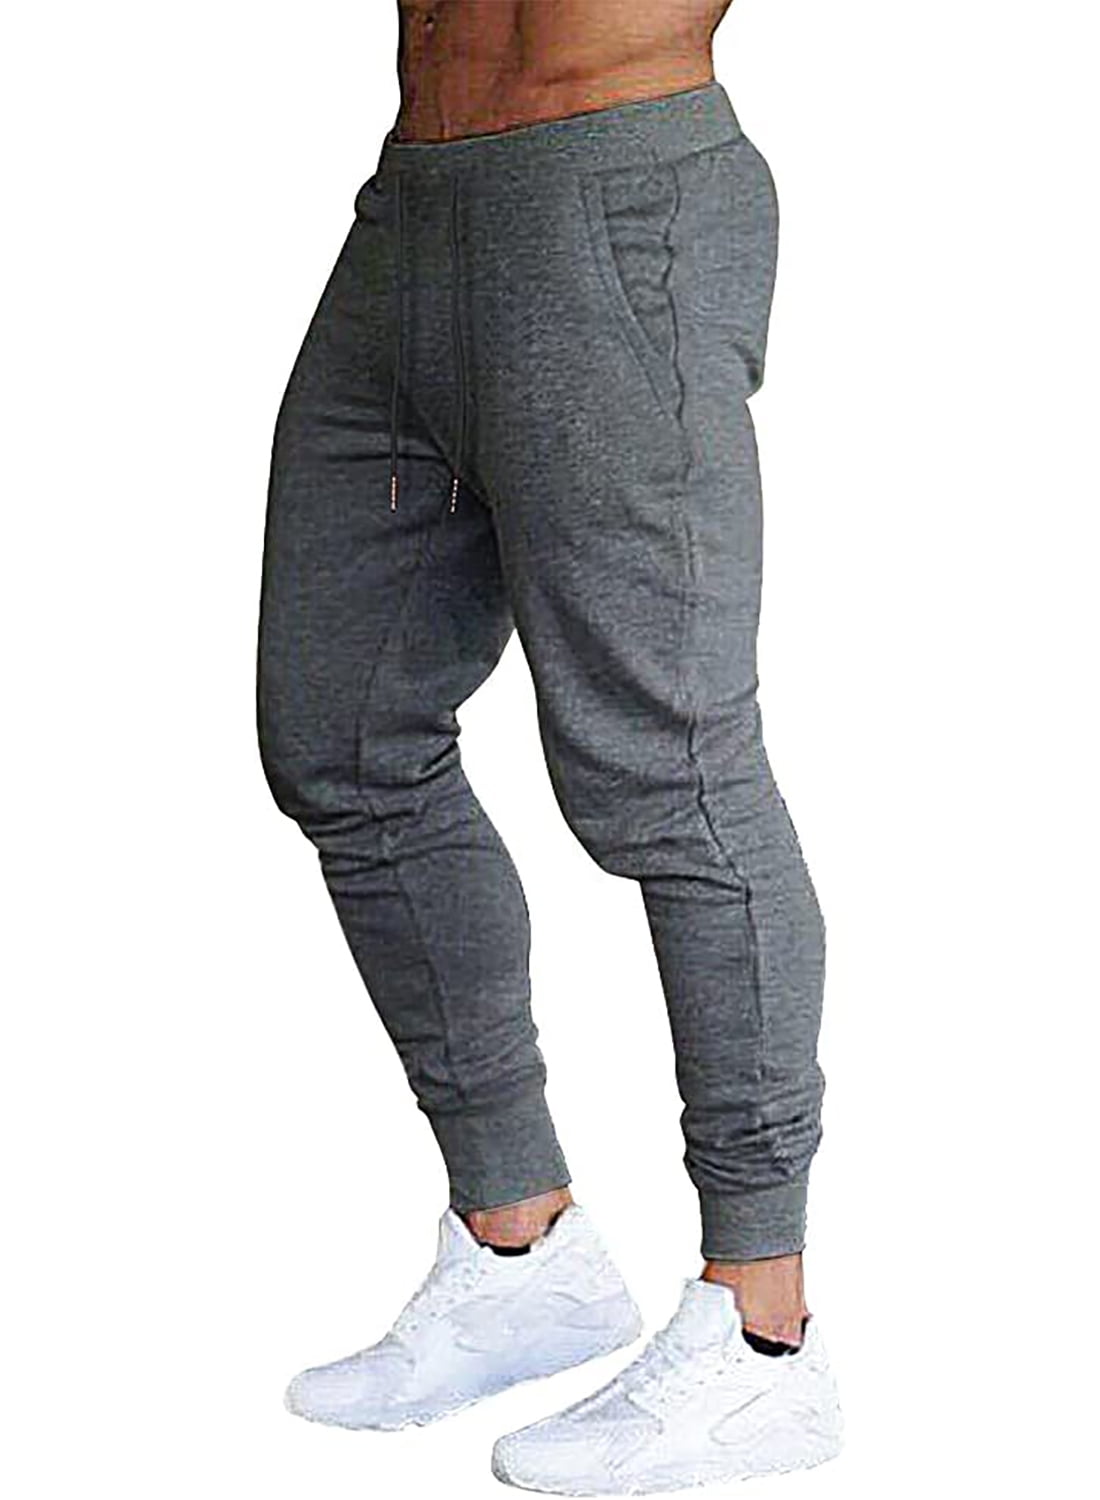 Hood Crew Men's Slim Joggers Workout Pants for Gym Running and Body ...